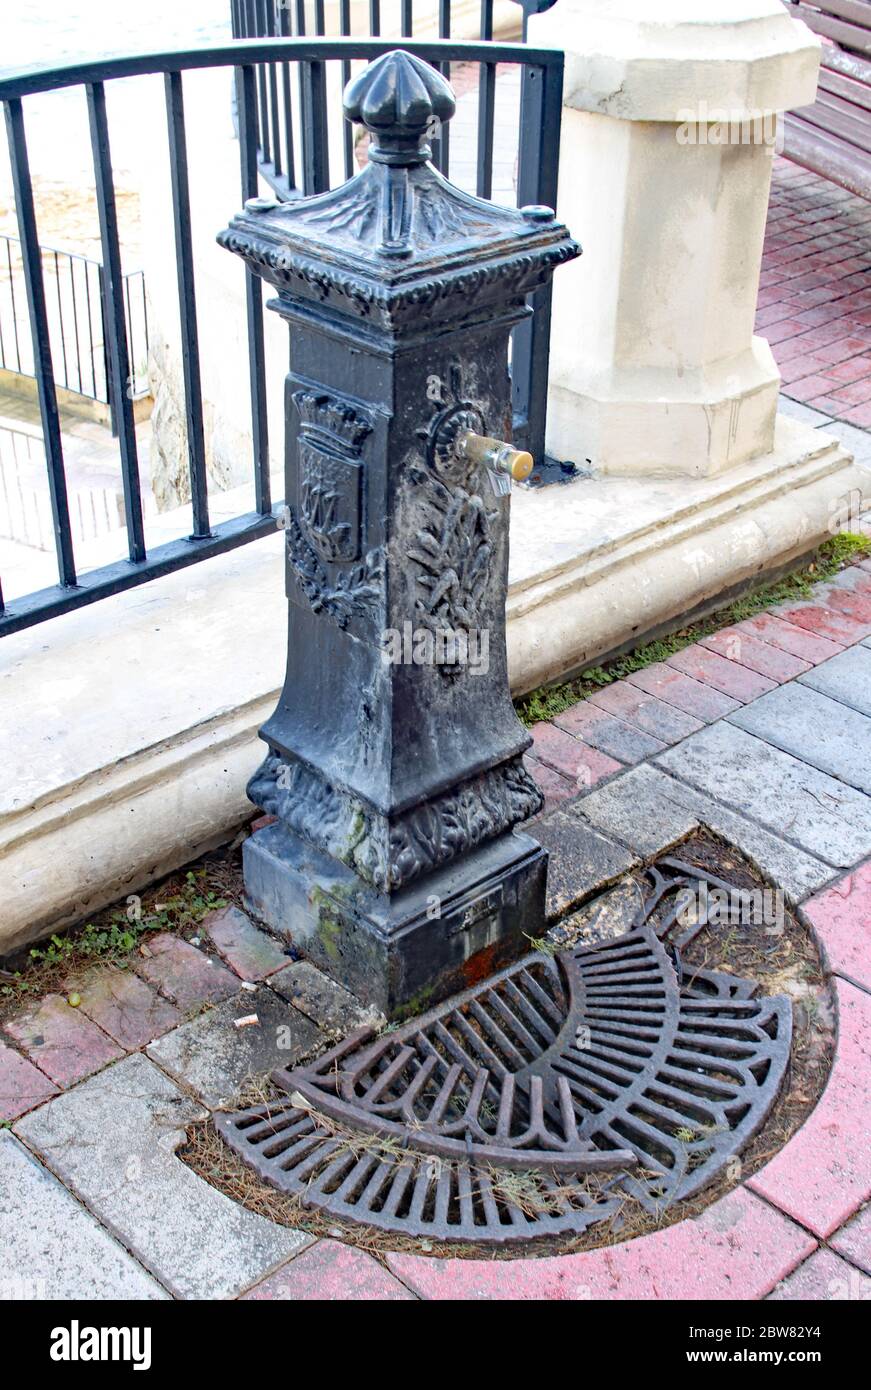 Old an worn water fountain with a broken drainage grate by the esplanade in Sliema, Malta Stock Photo